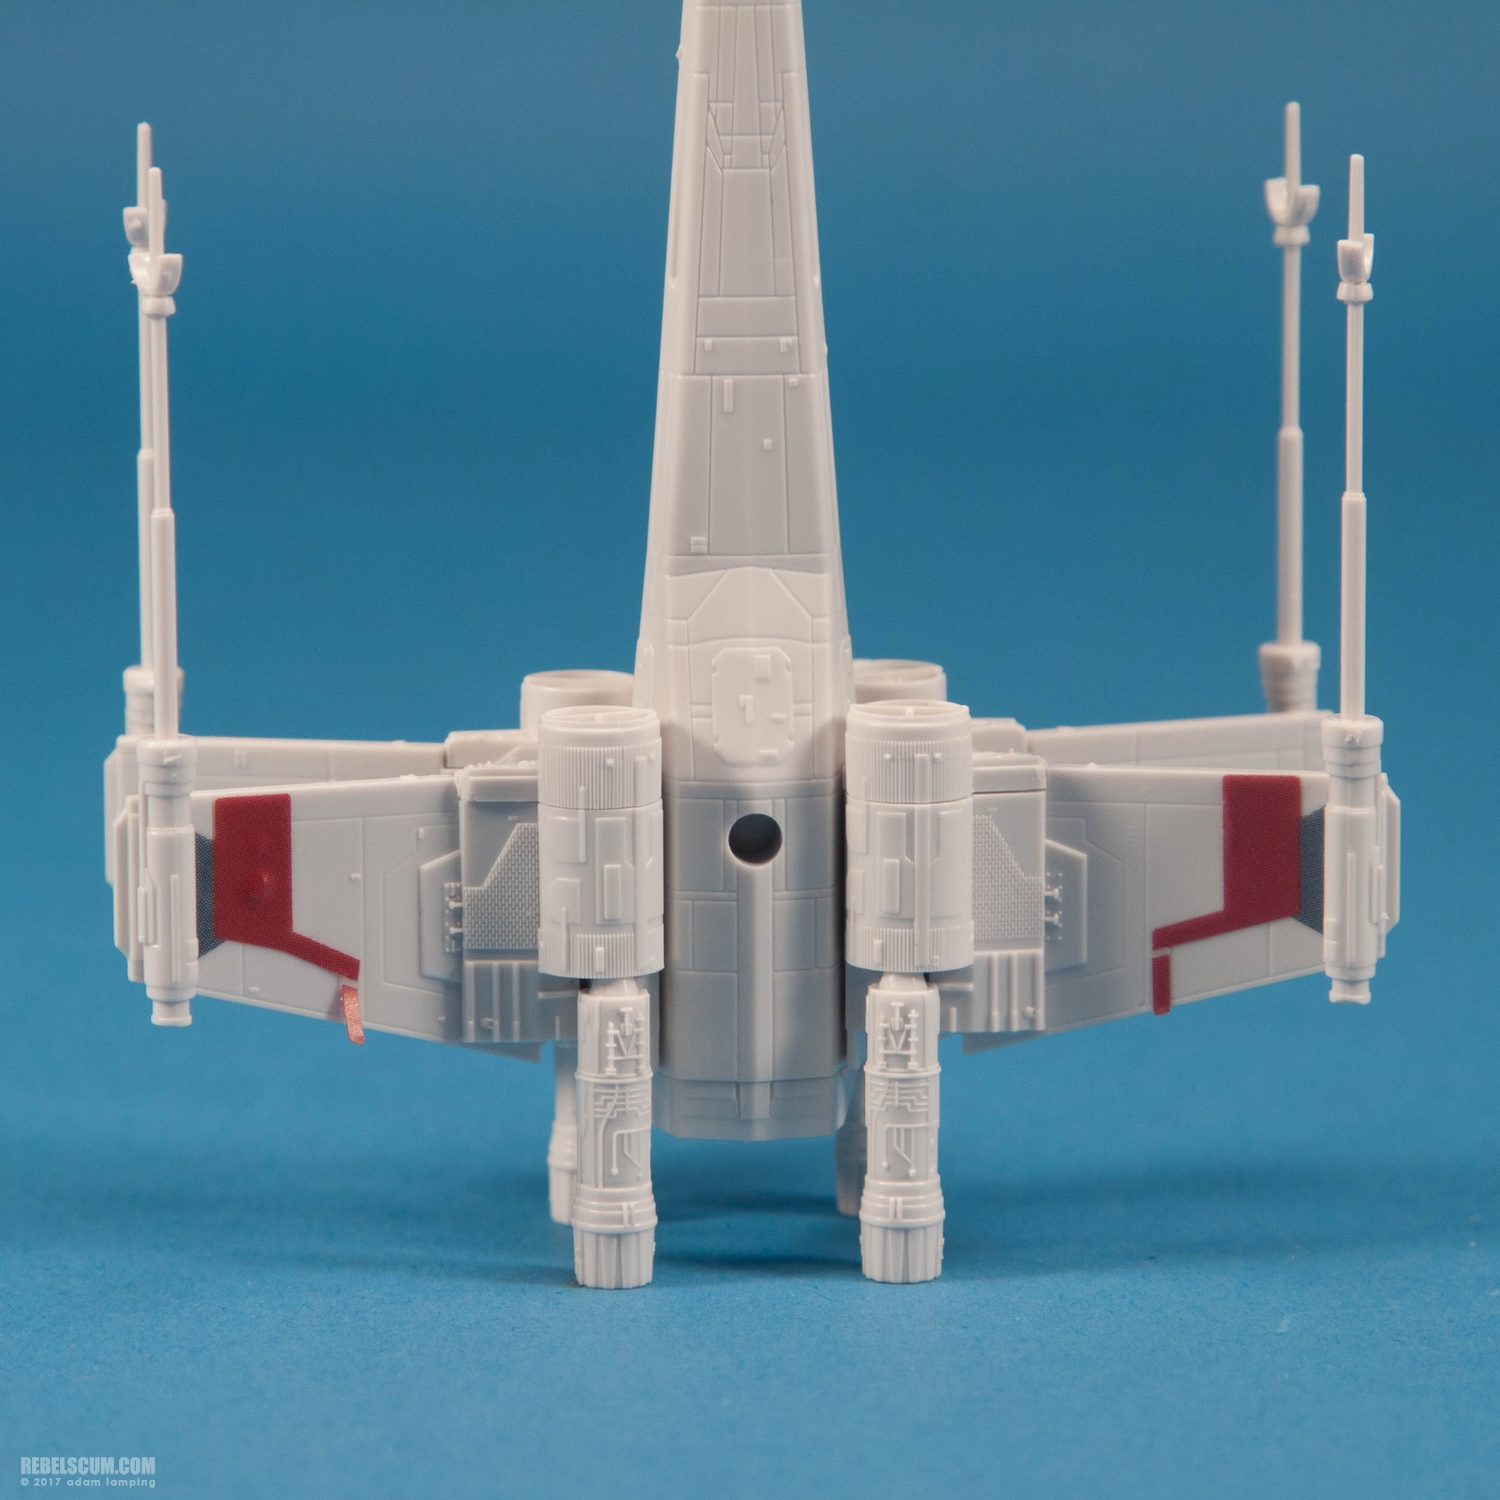 bandai-red-squadron-x-wing-starfighter-scale-model-kit-024.jpg